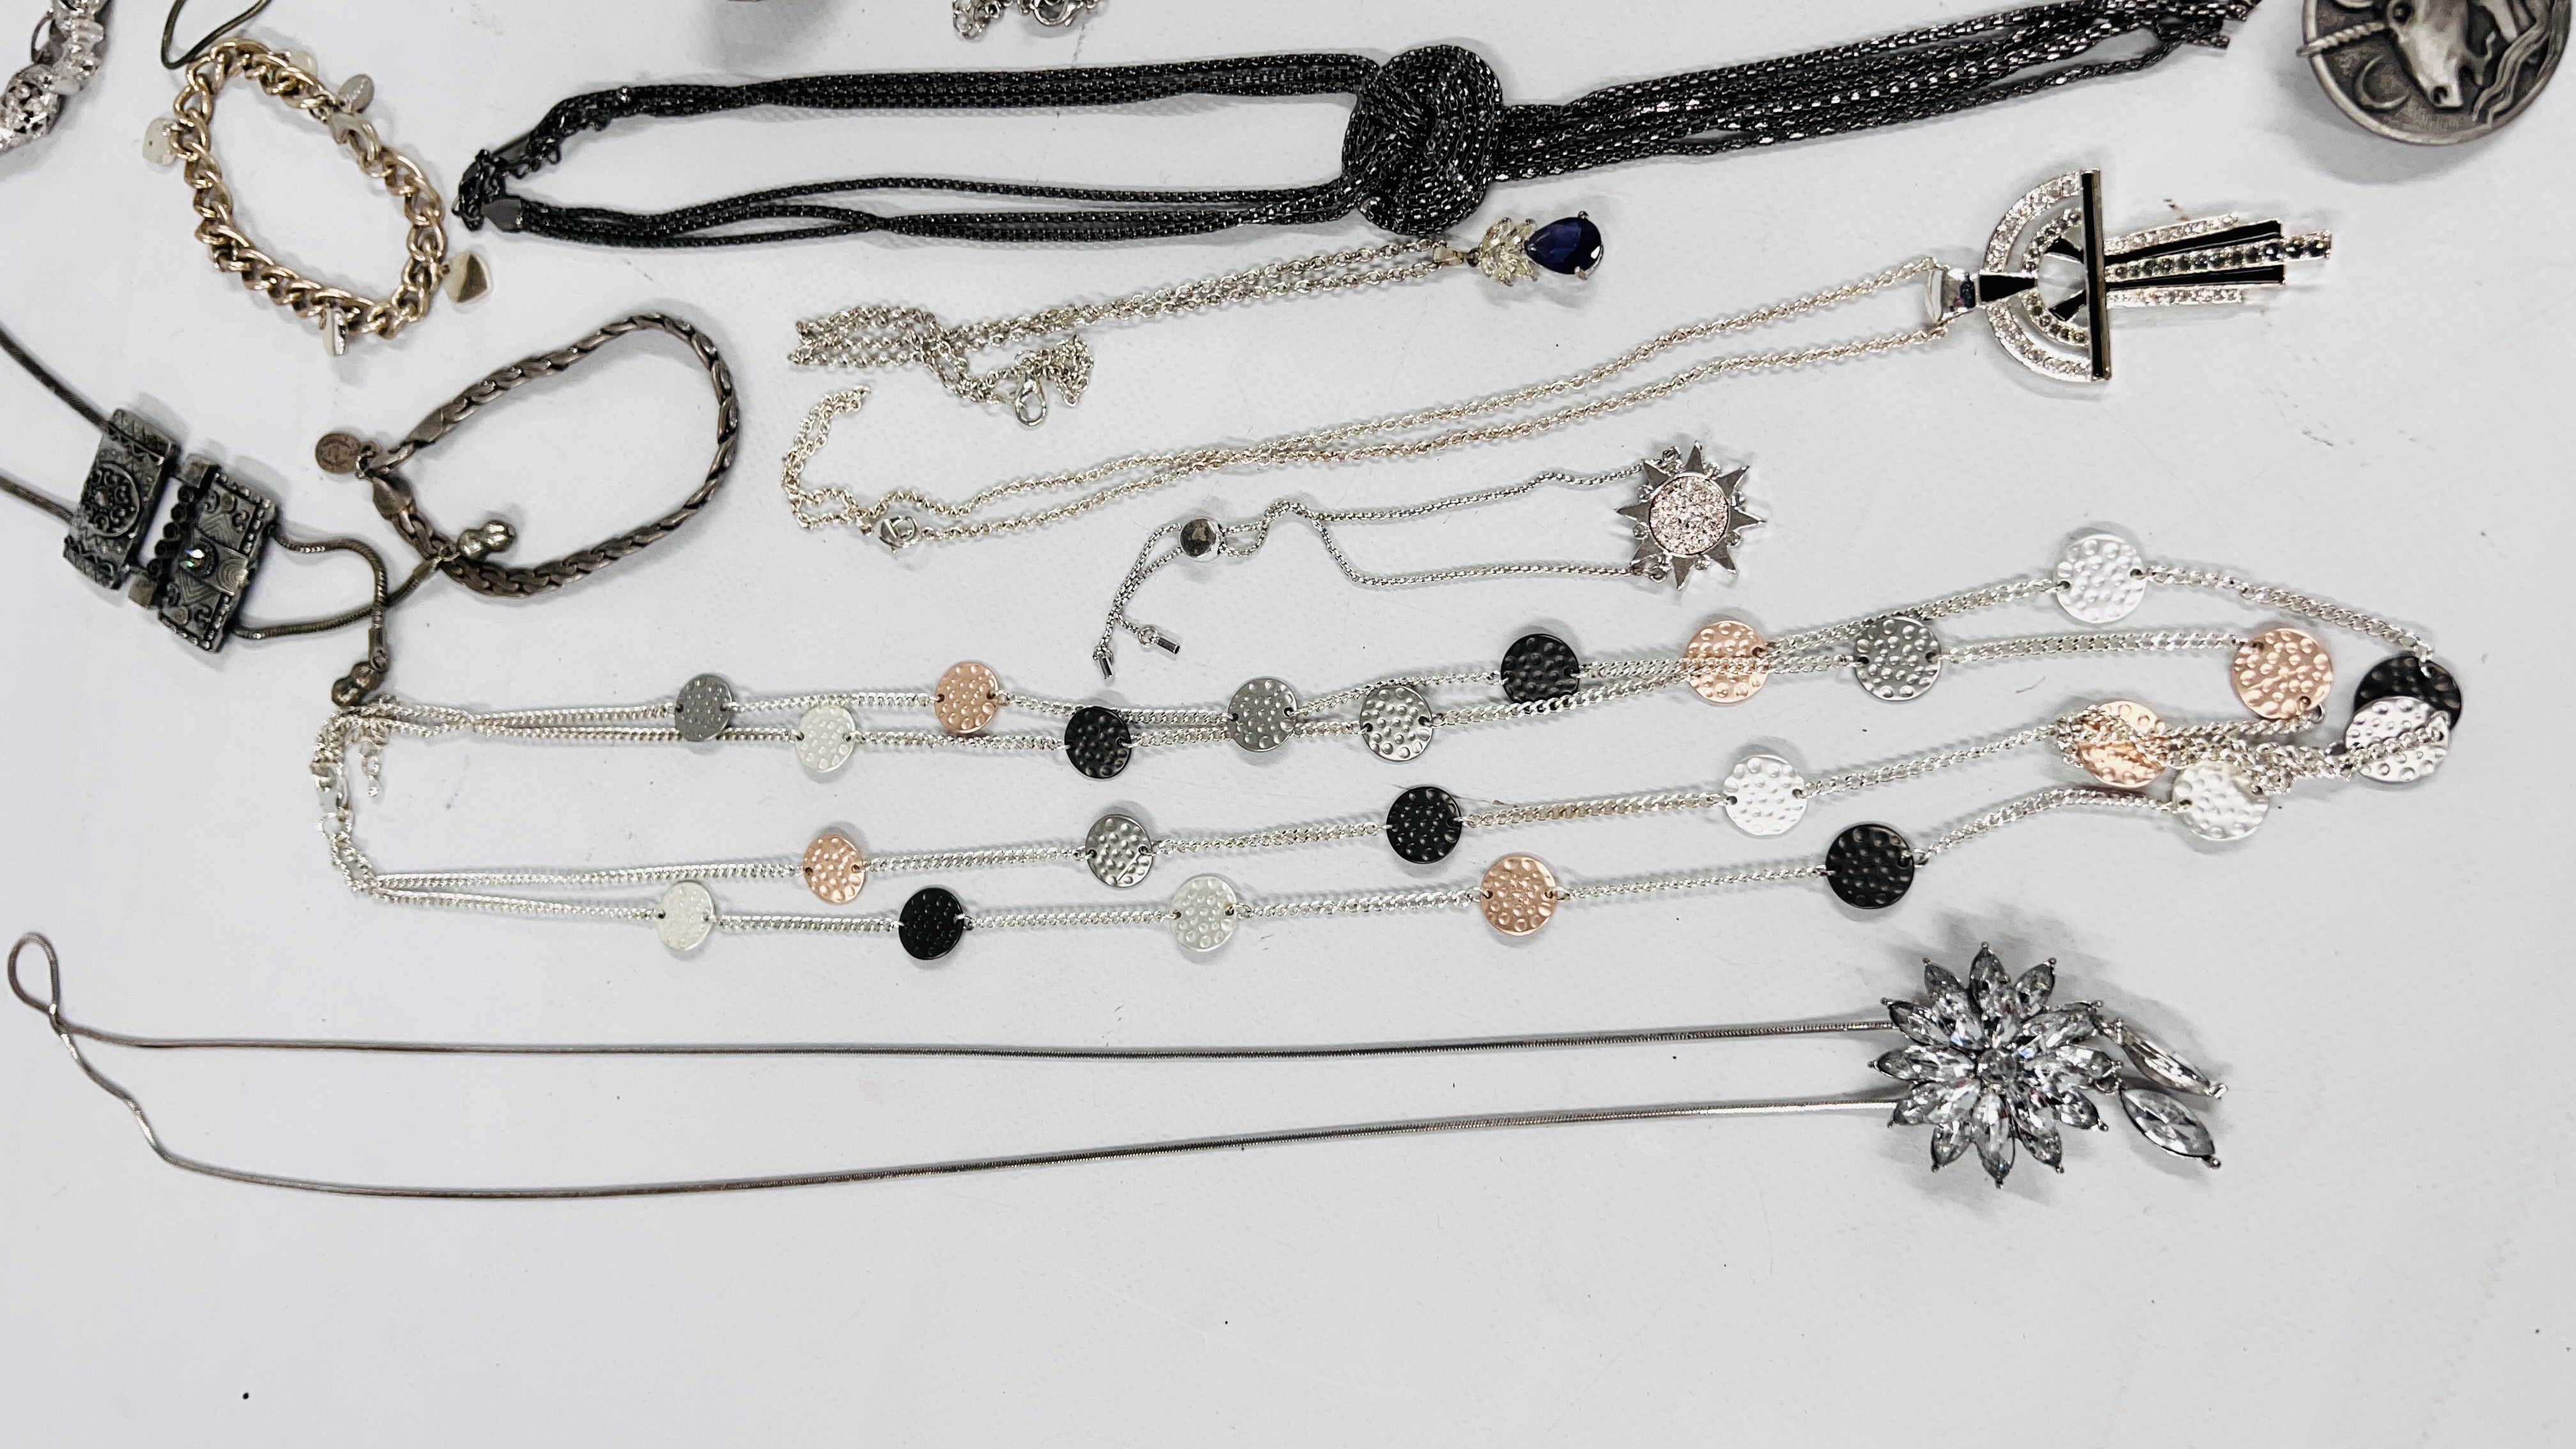 SELECTION OF SILVERTONE COSTUME JEWELLERY ALONG WITH A JEWELLERY BOX FULL OF BEADED NECKLACES. - Image 9 of 12